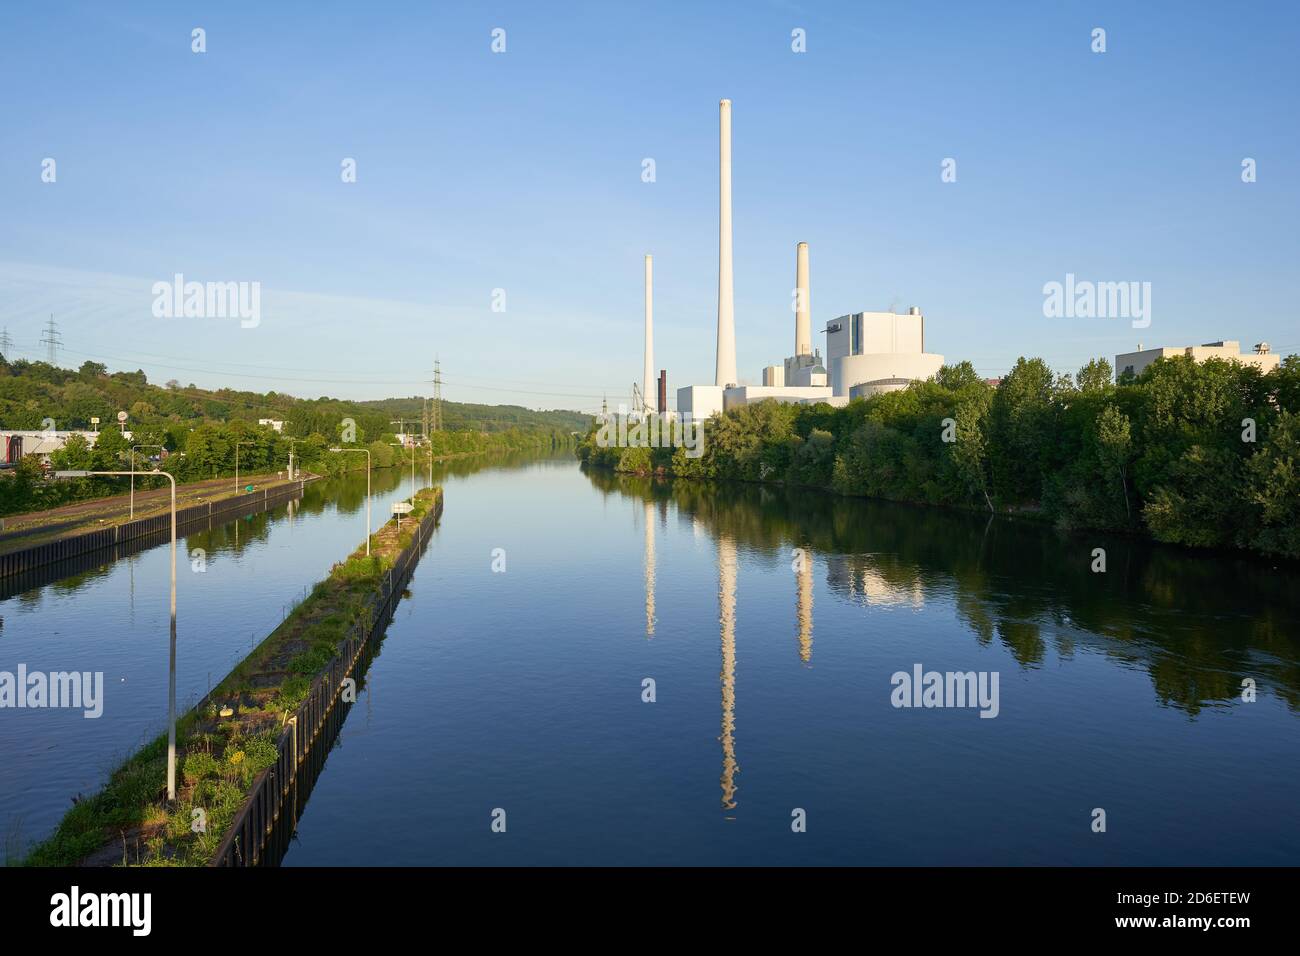 The Altbach / Deizisau thermal power station is a hard coal-fired power station. Stock Photo